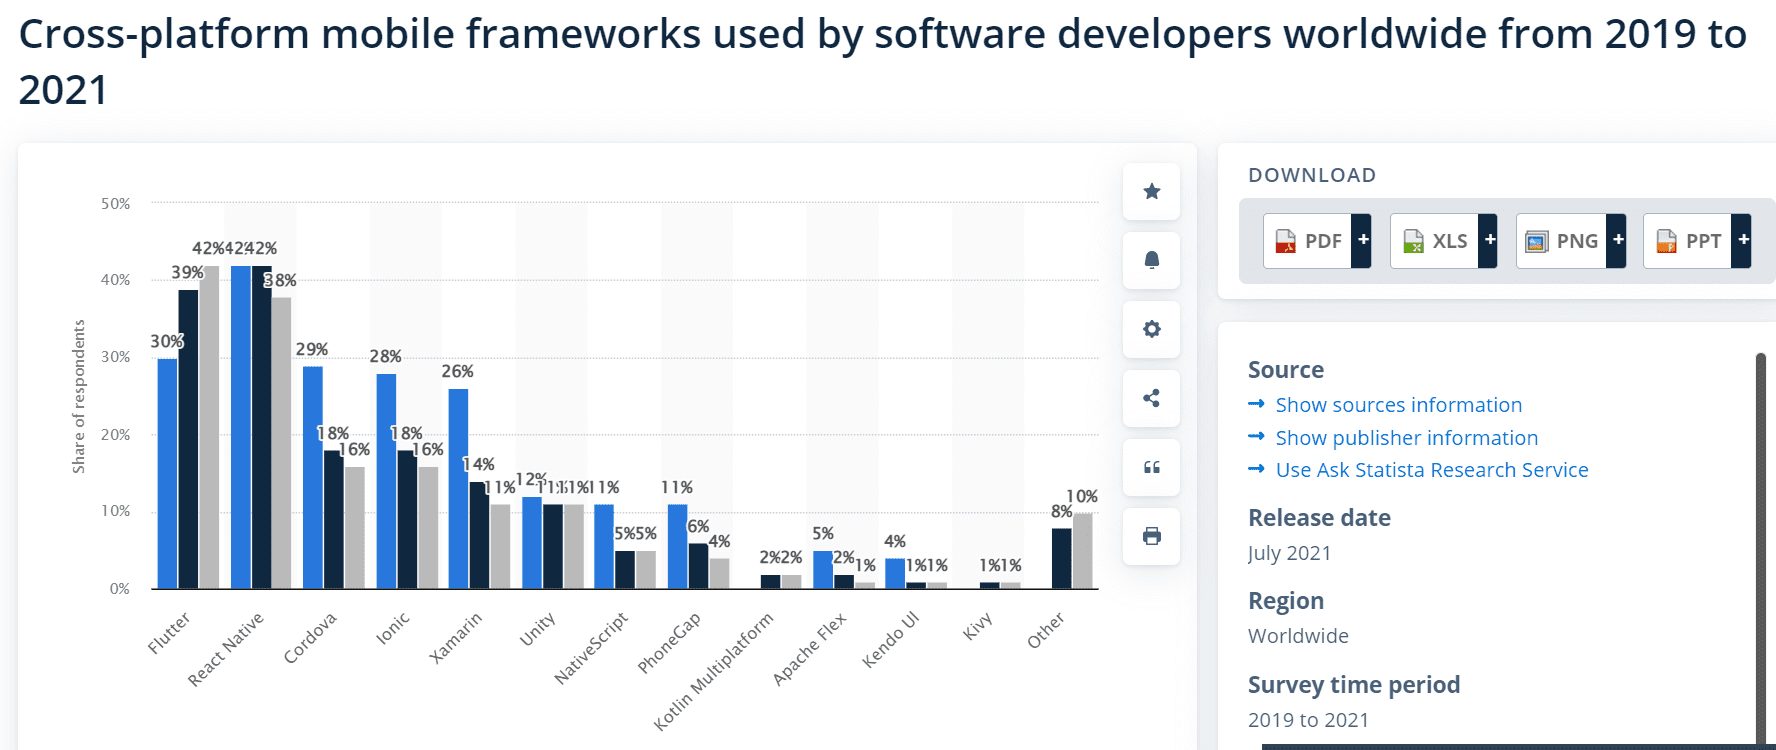 Cross platform mobile frameworks used by software developers worldwide from 2019 to 2021